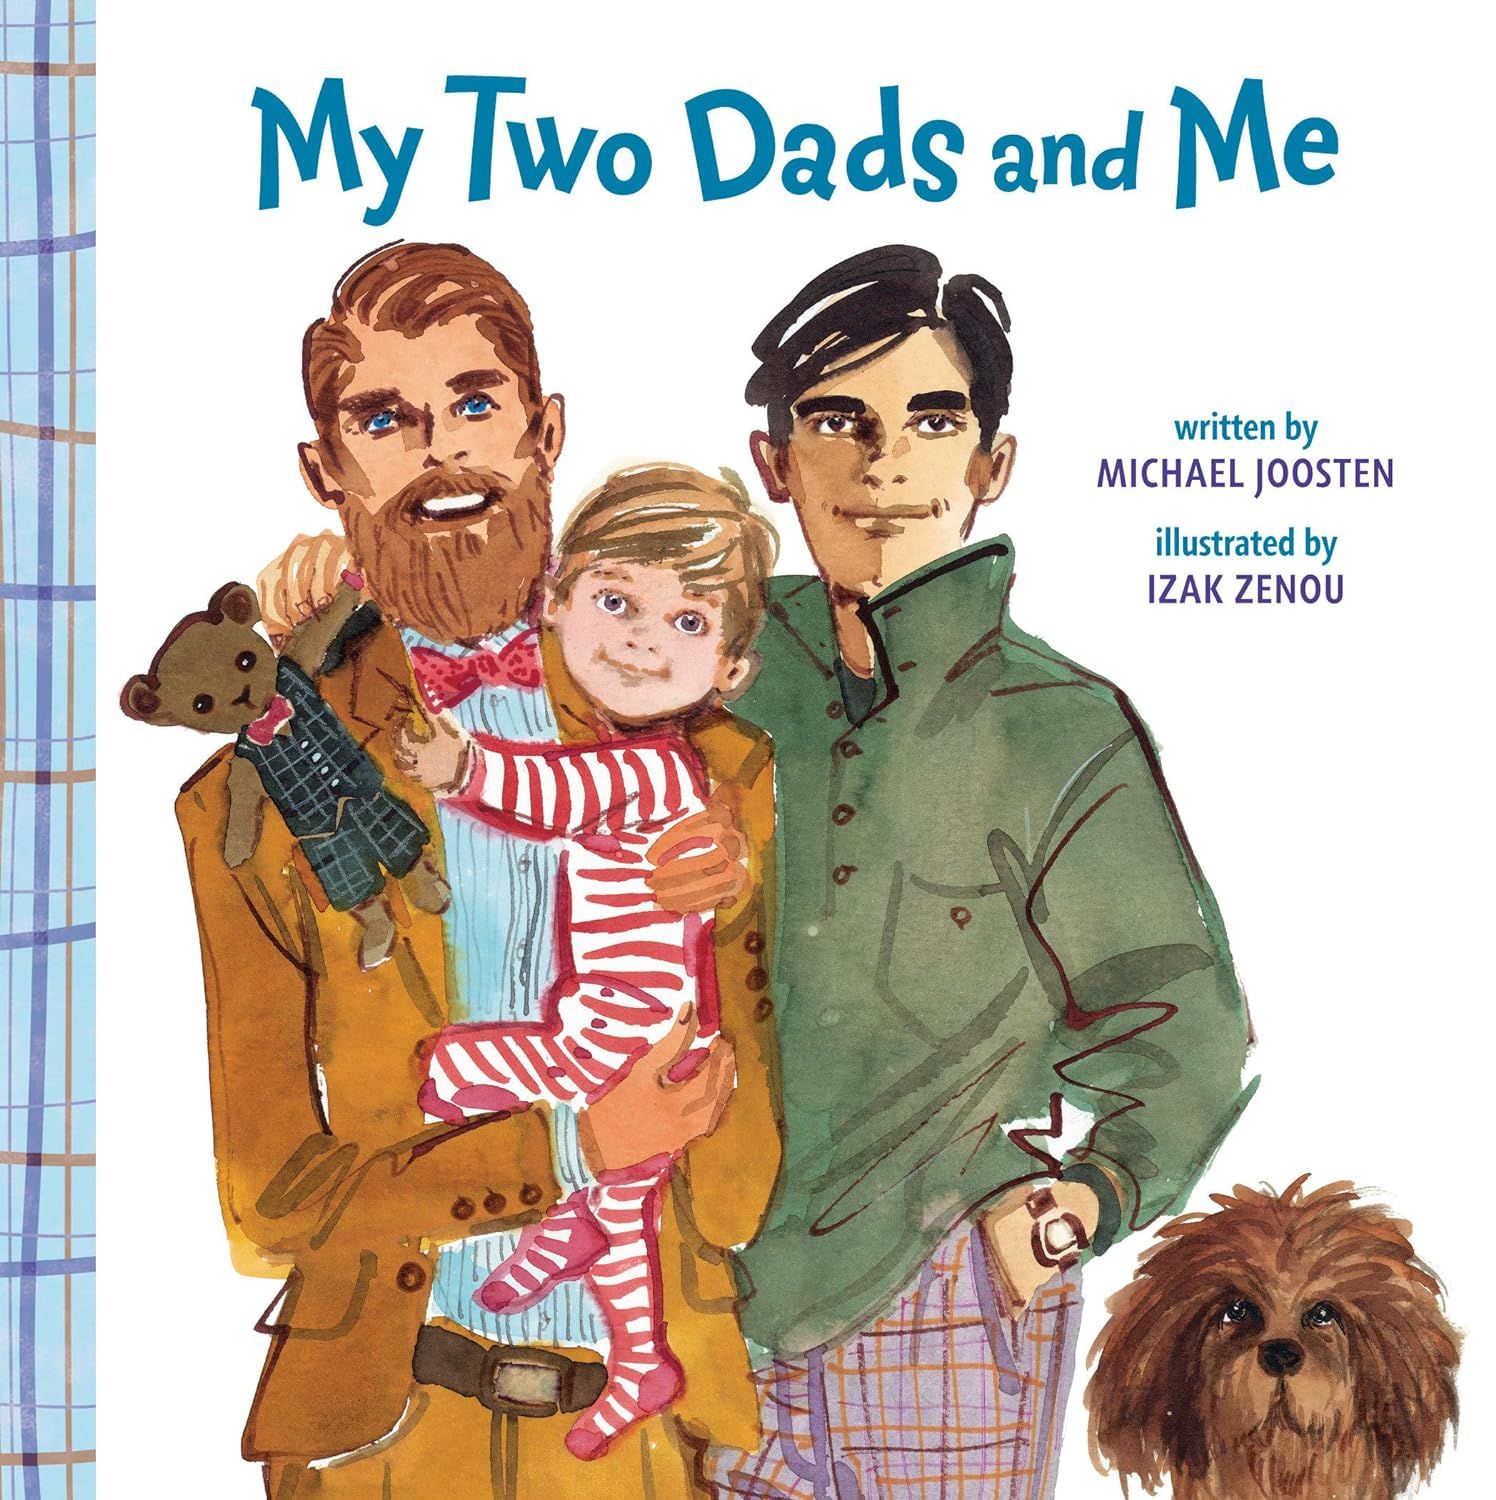 Cover of My Two Dads and Me by Michael Joosten & Izak Zenou